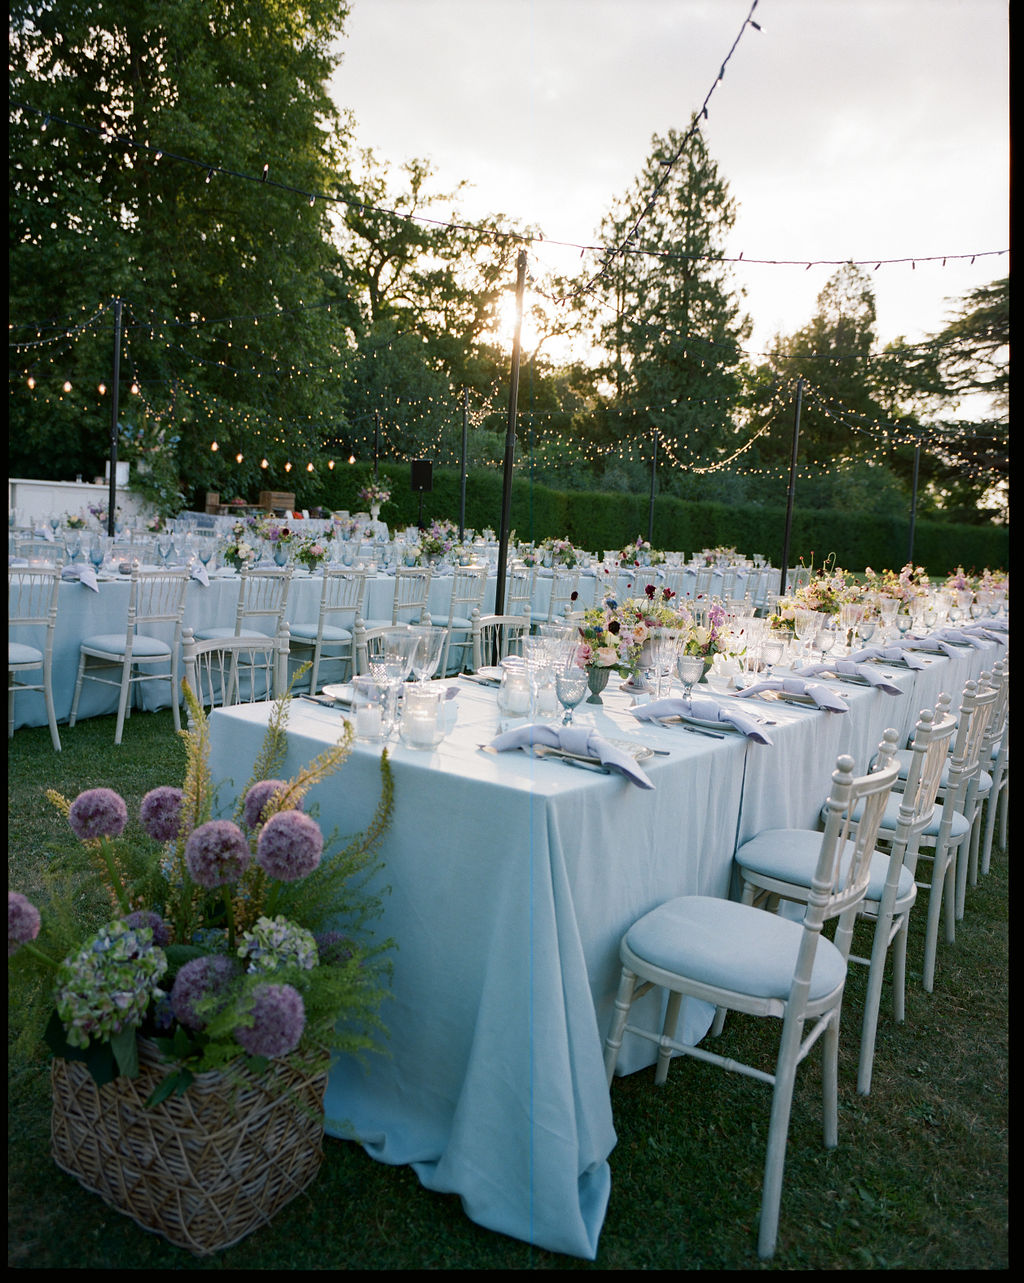 Heckfield Place, Wedding Welcome Party, Summer Garden Party, Outdoor Event, Pocketful of Dreams, Paula Rooney, Lucy Birkhead, Vogue Wedding, Skye Gyngell